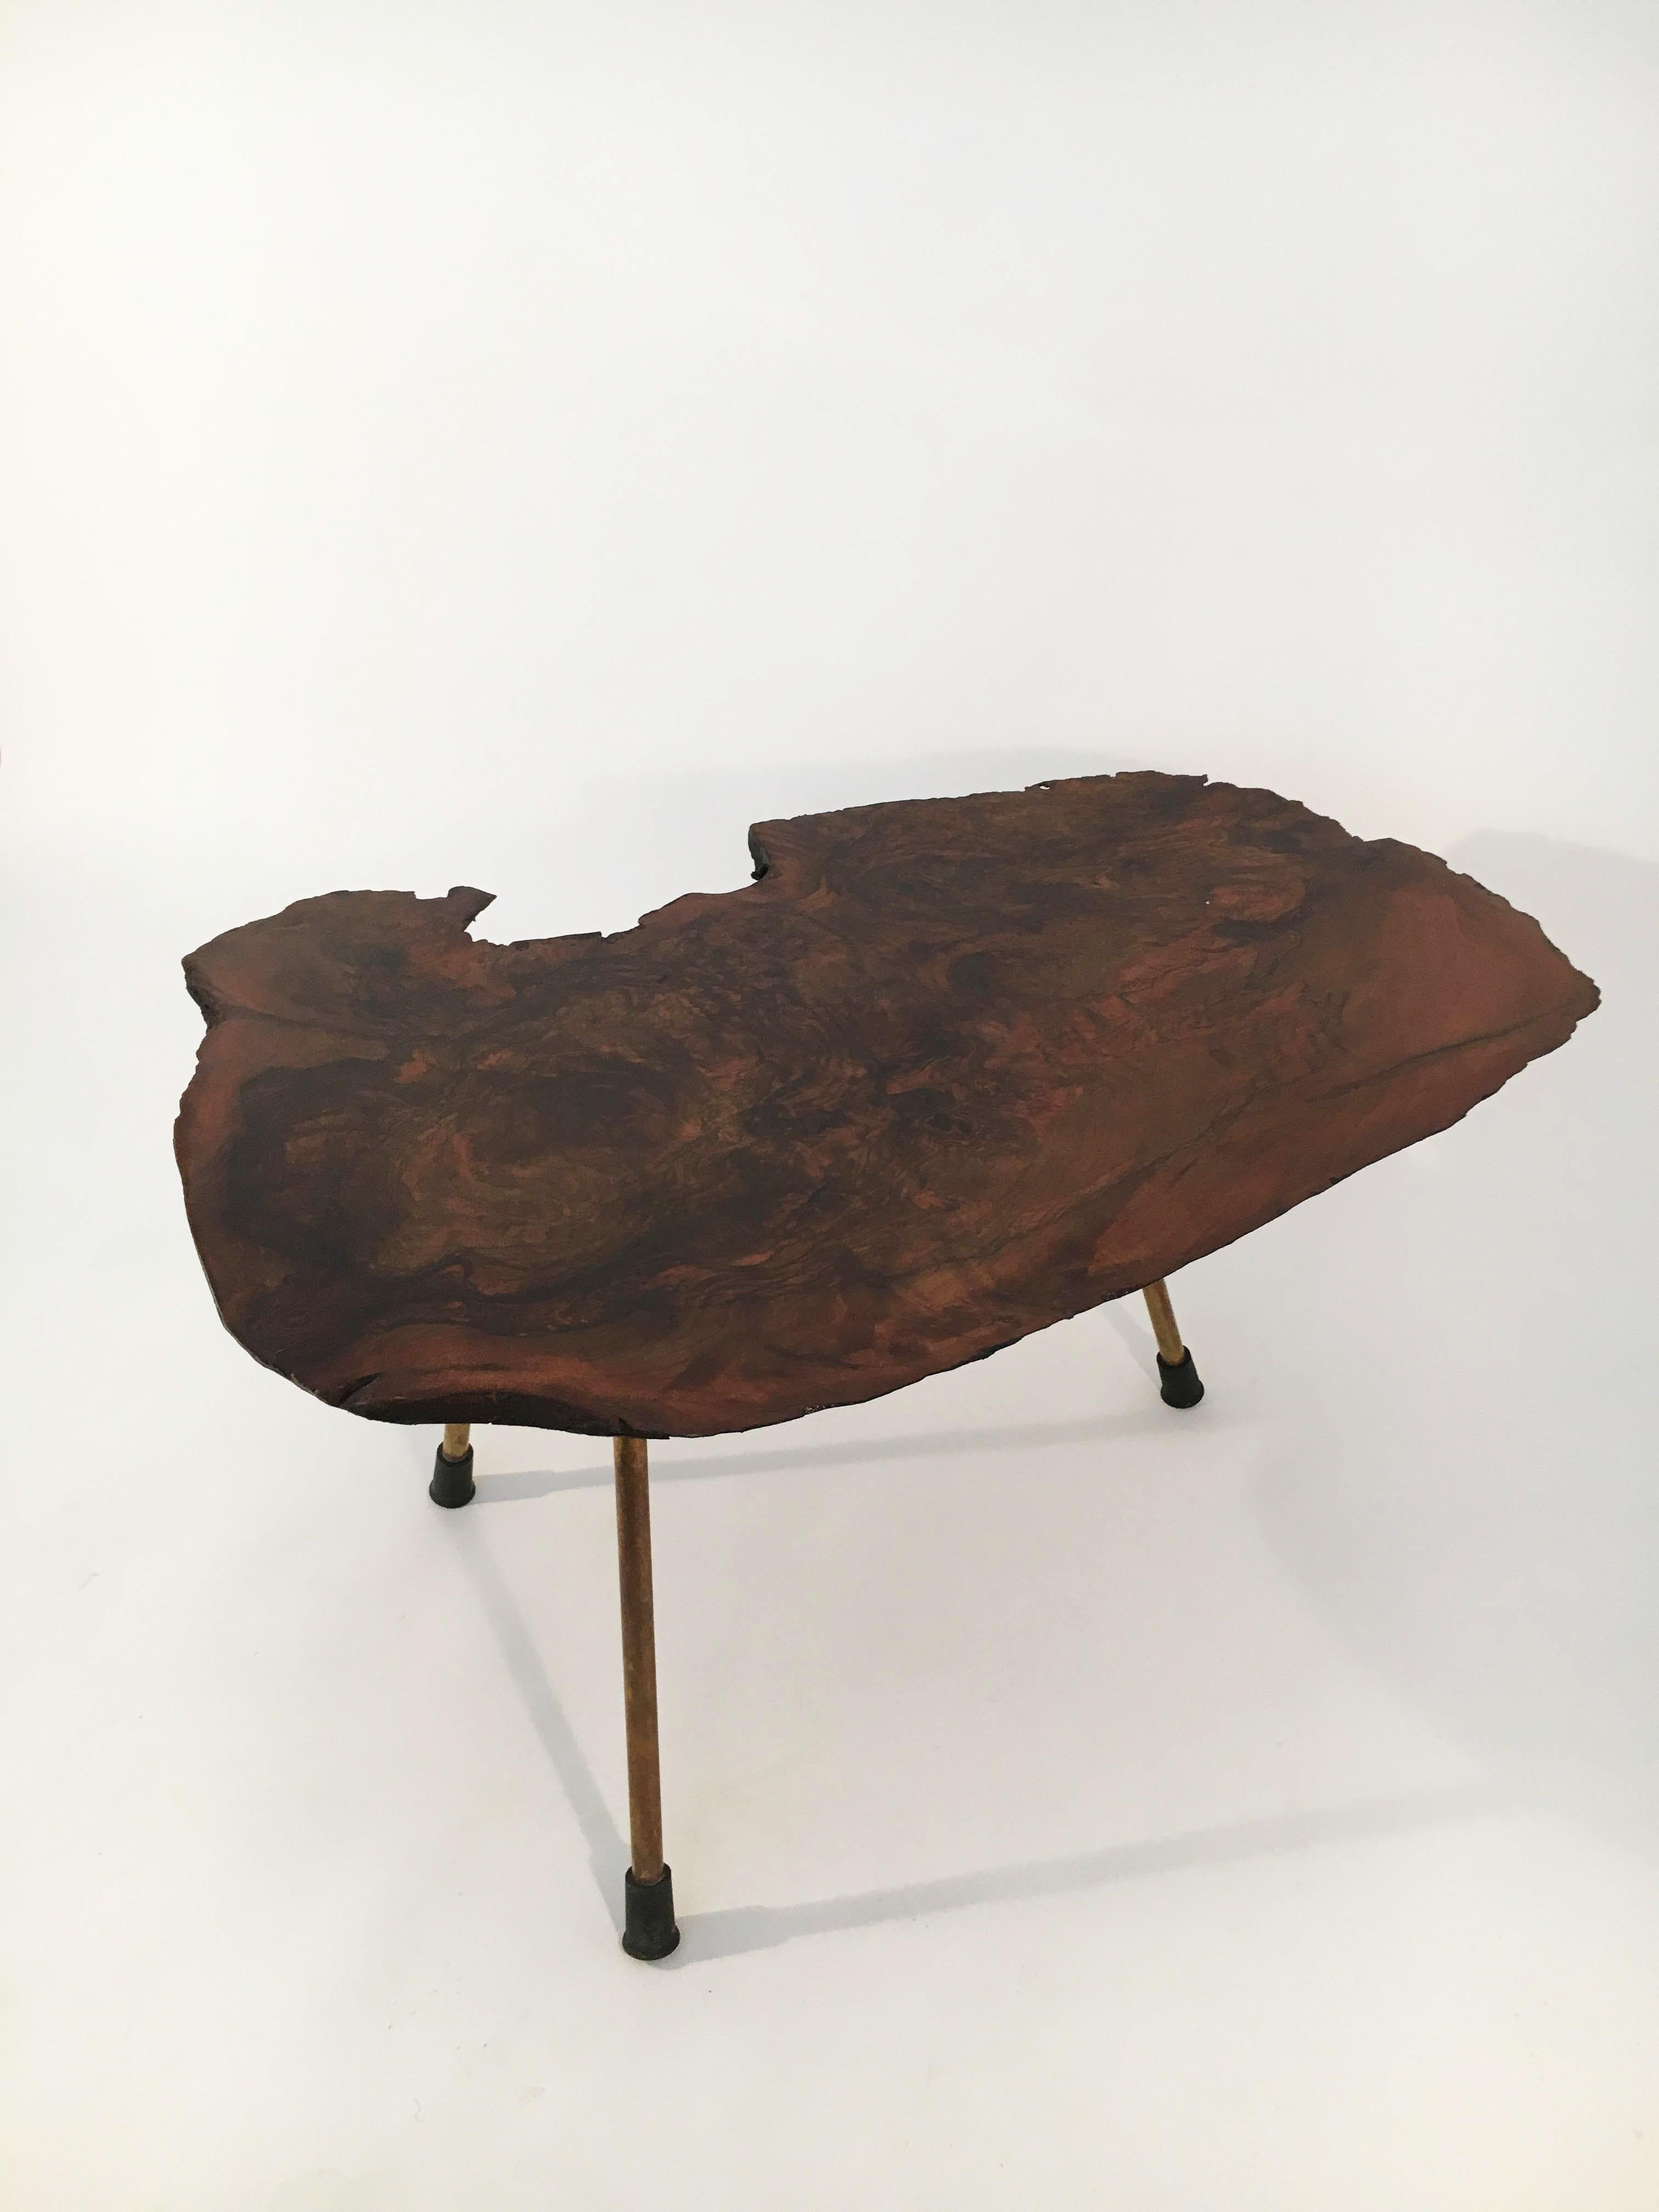 Beautiful tree trunk table with a great color, shape and size by Carl Auböck, Austria, 1950s. Marked on the legs with numbers and signed Auböck. In excellent vintage condition with just the right amount of gently aged patina on the brass legs and